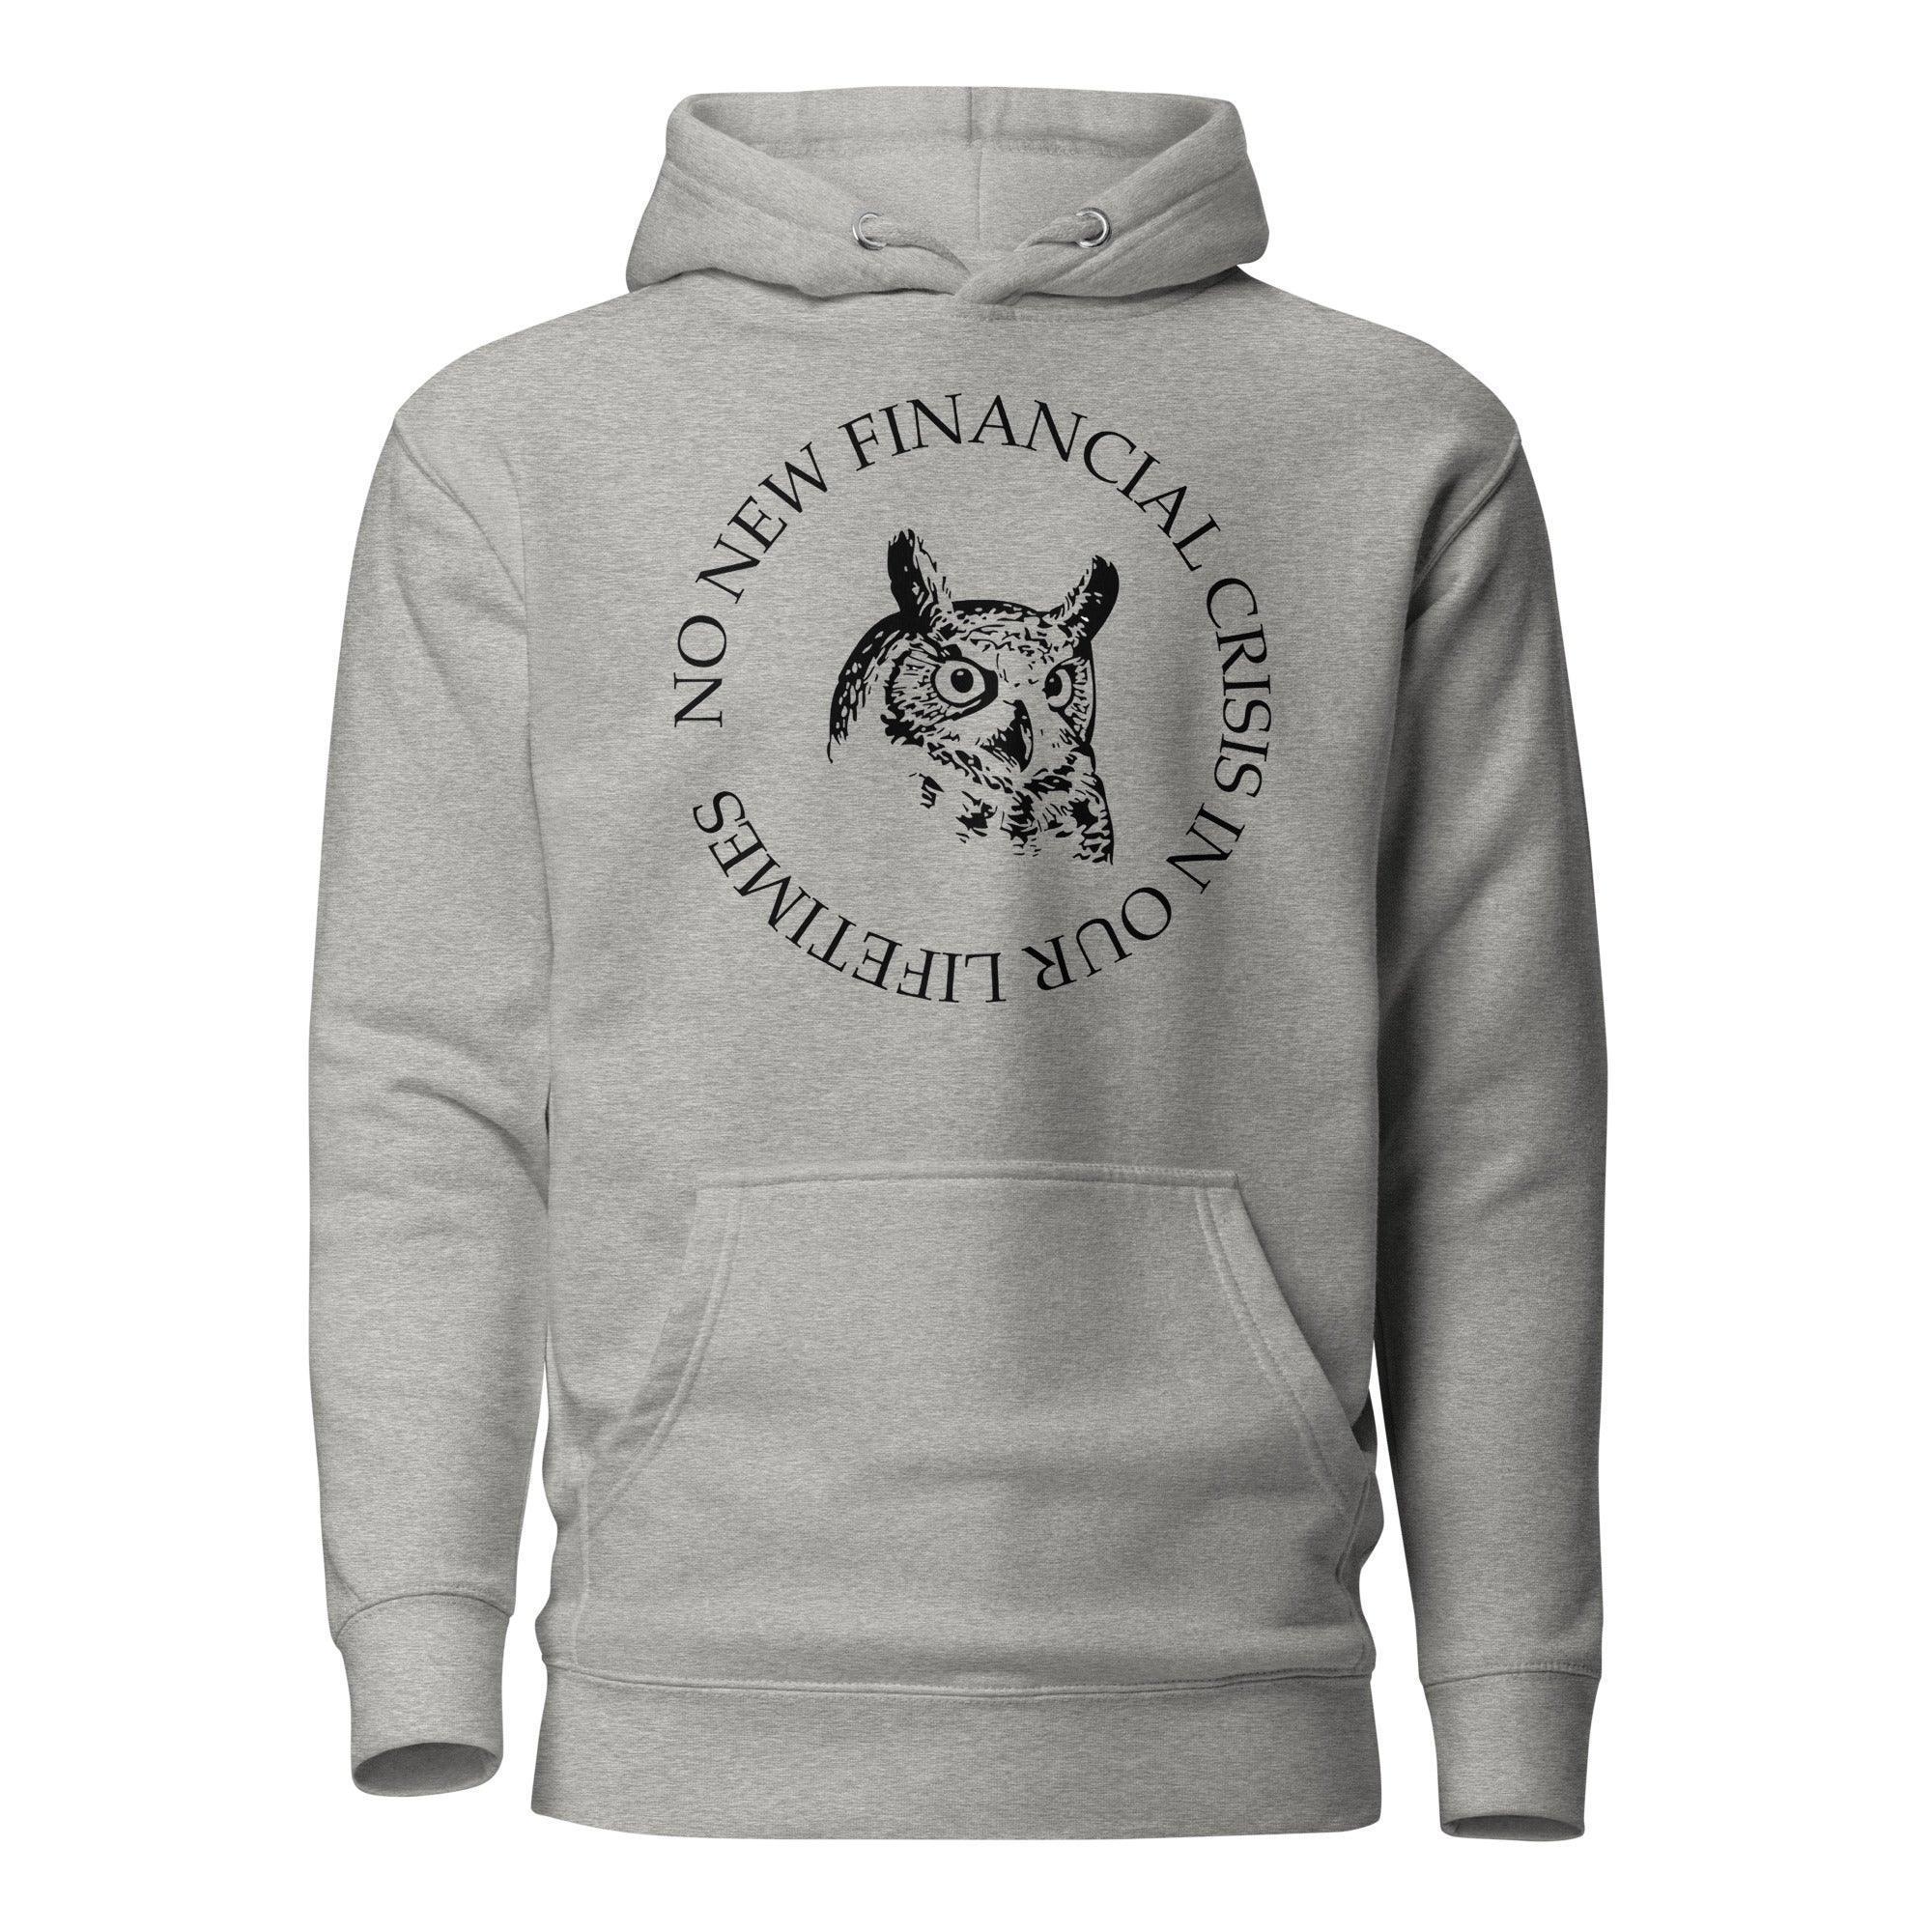 Financial Crisis Pullover Hoodie - InvestmenTees